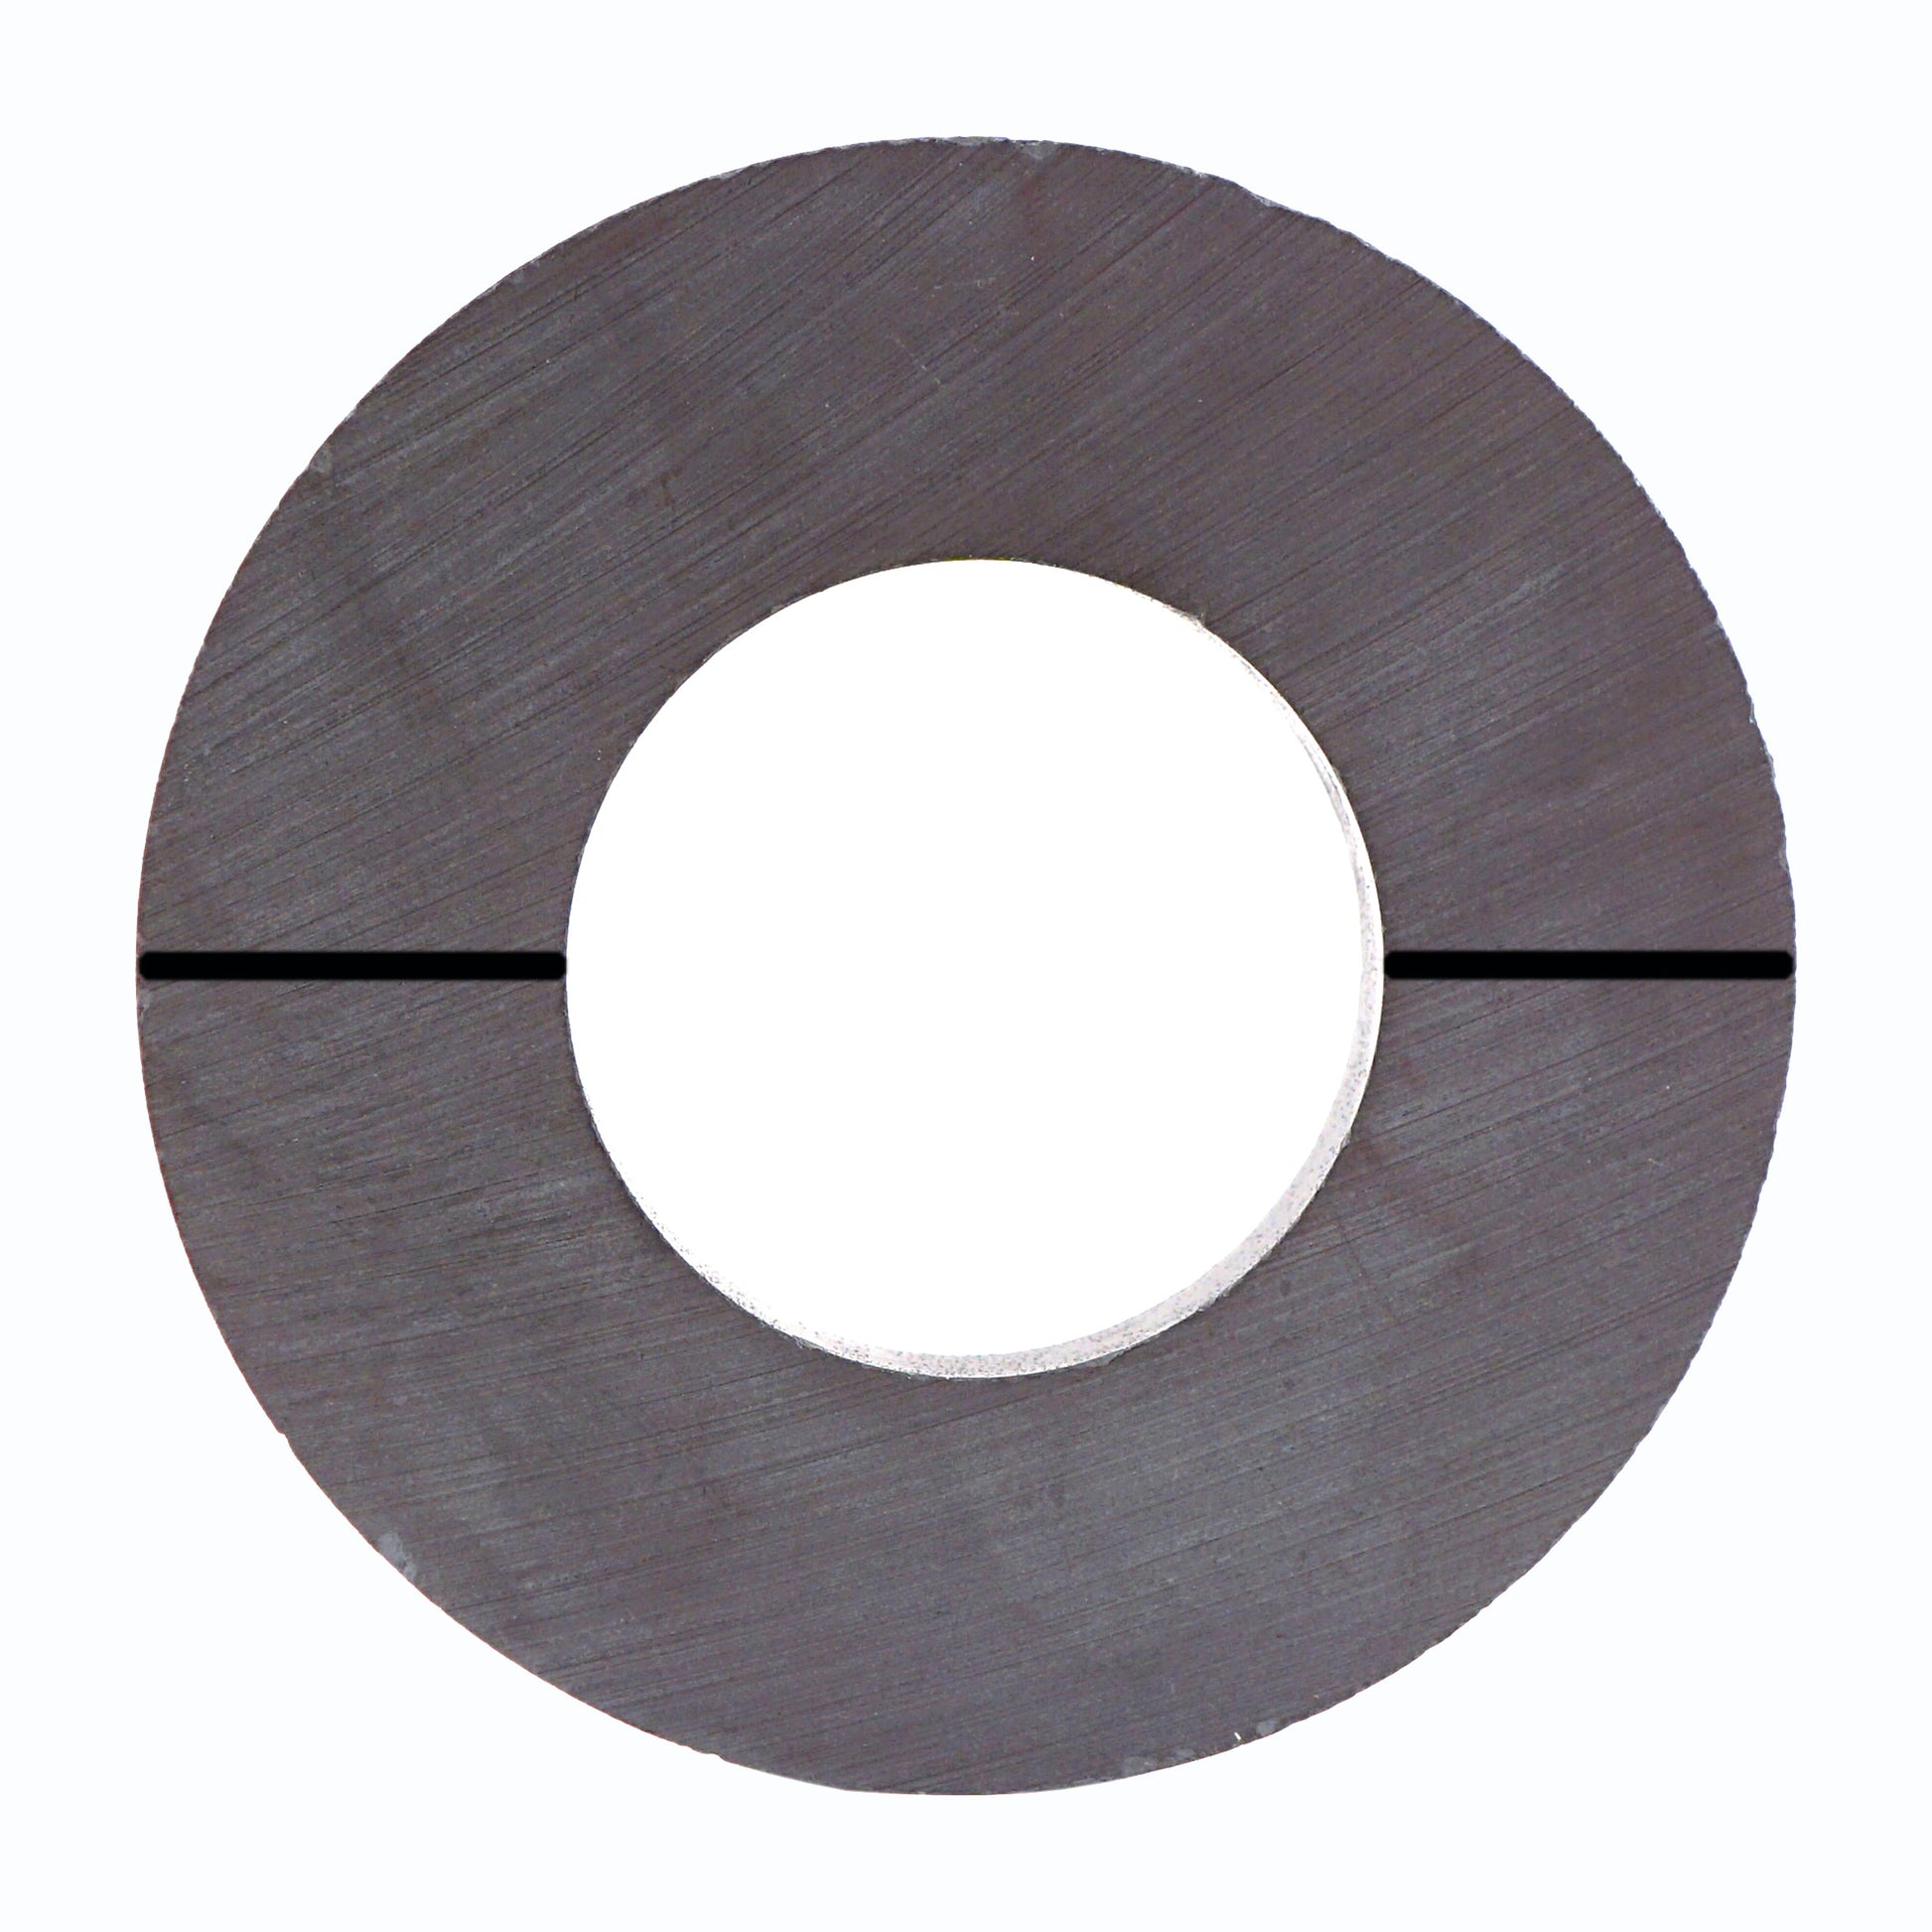 Load image into Gallery viewer, SCR013001 Samarium Cobalt Ring Magnet with Notch - Bottom View